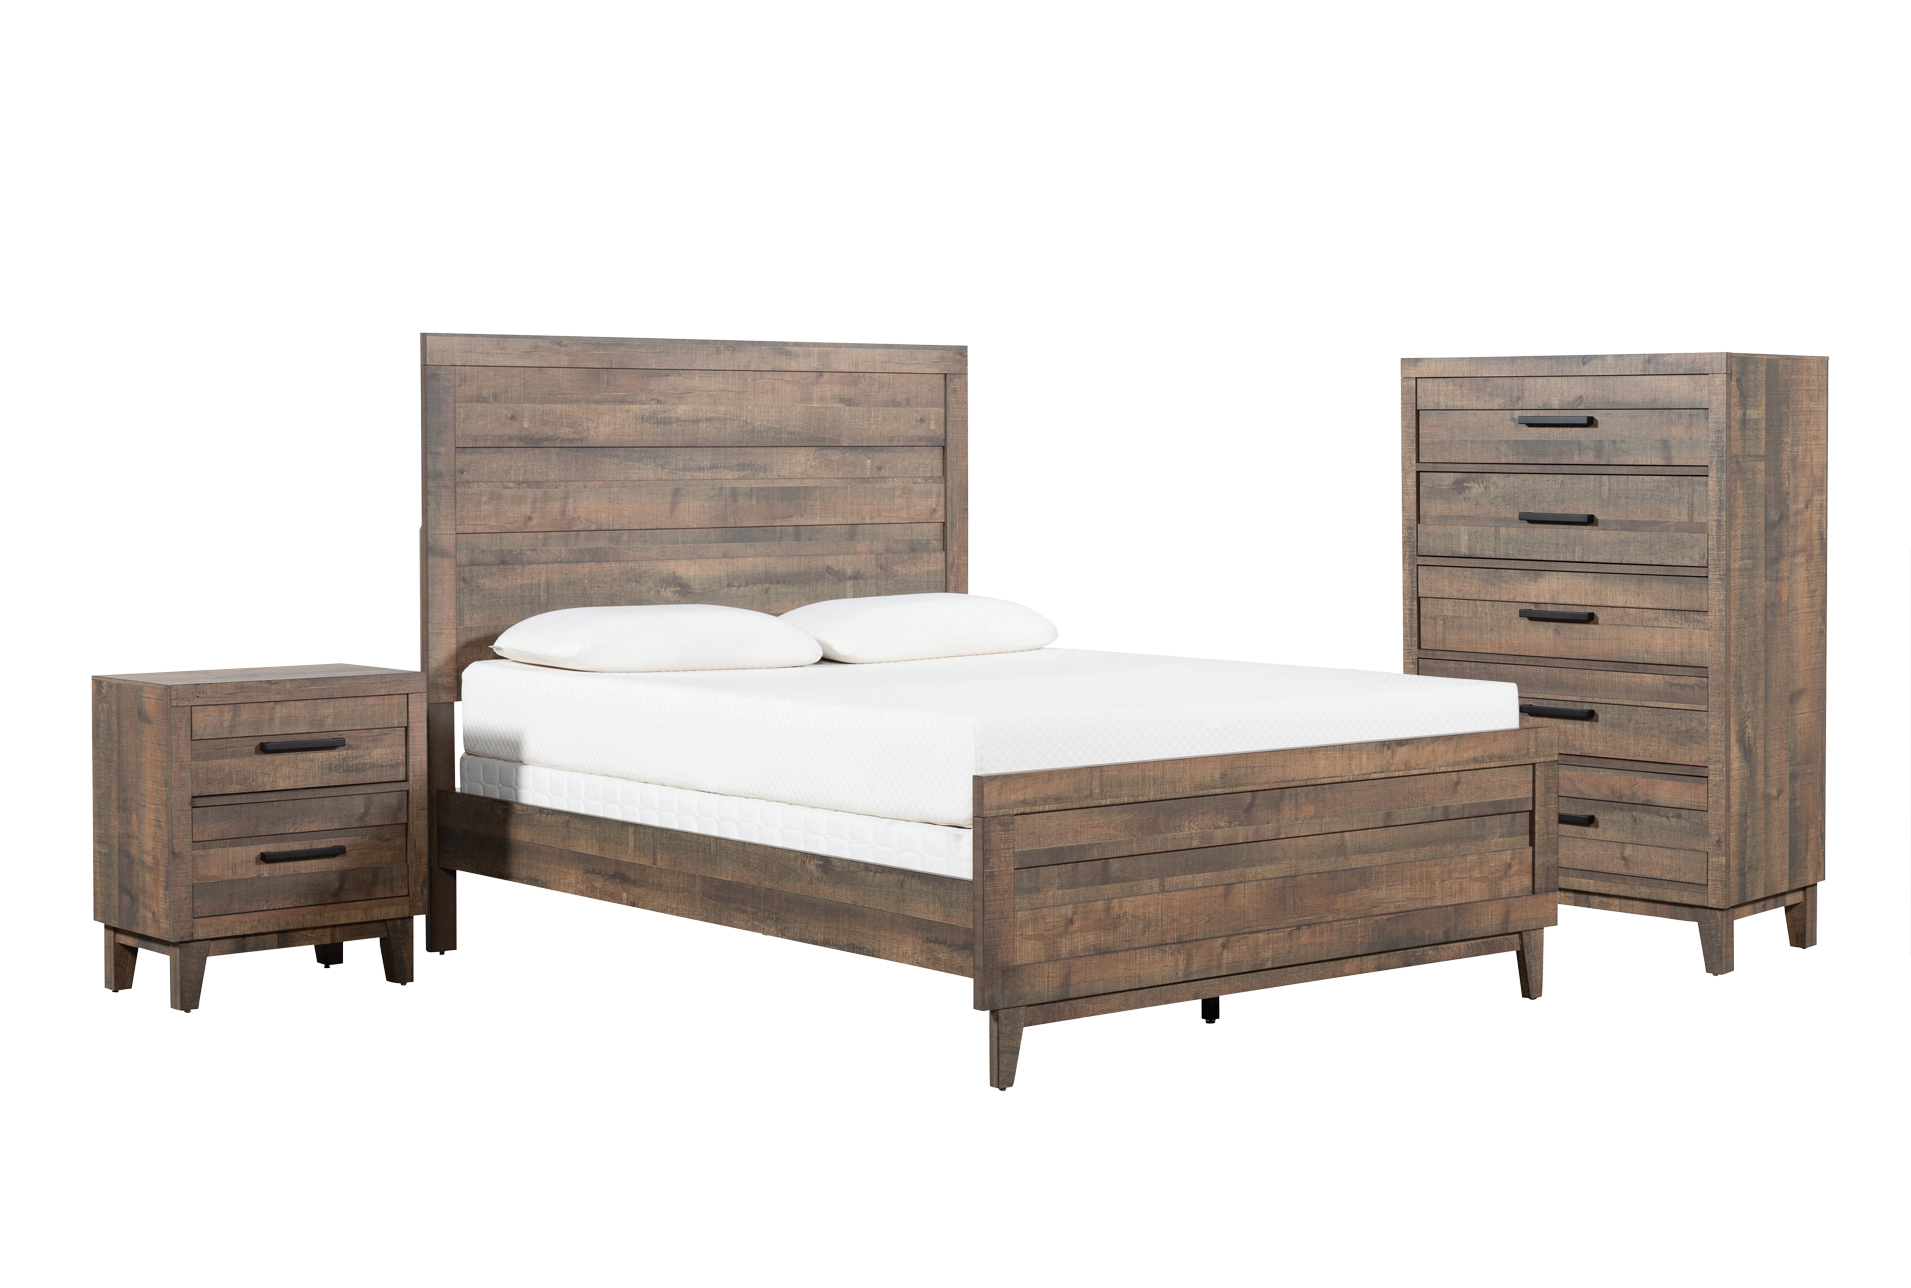 youth bedroom sets clearance